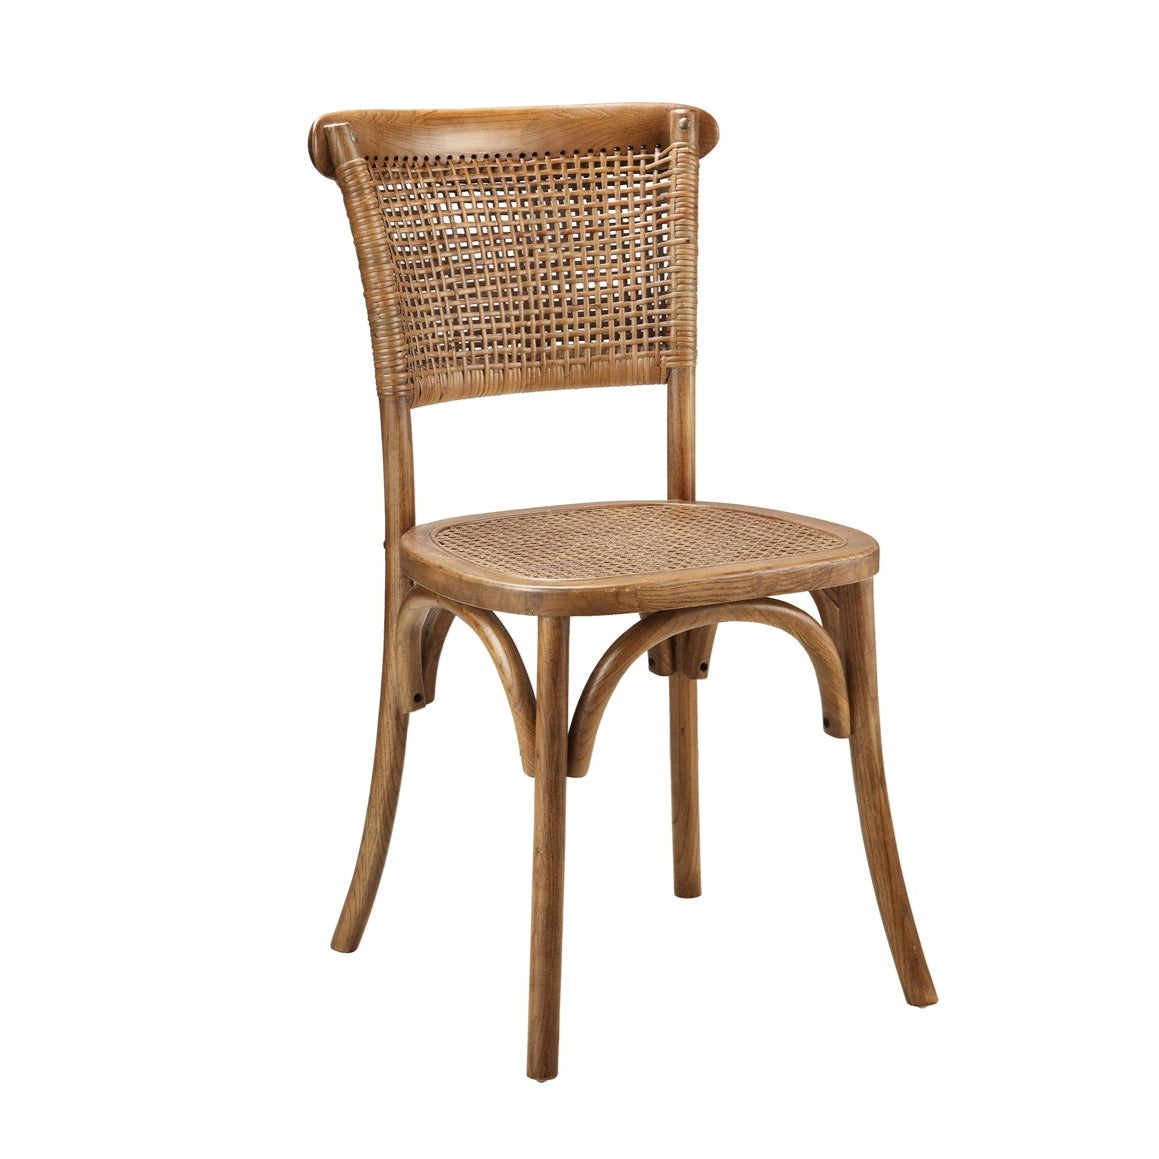 Set of Two Summerhill Dining Chairs - Natural